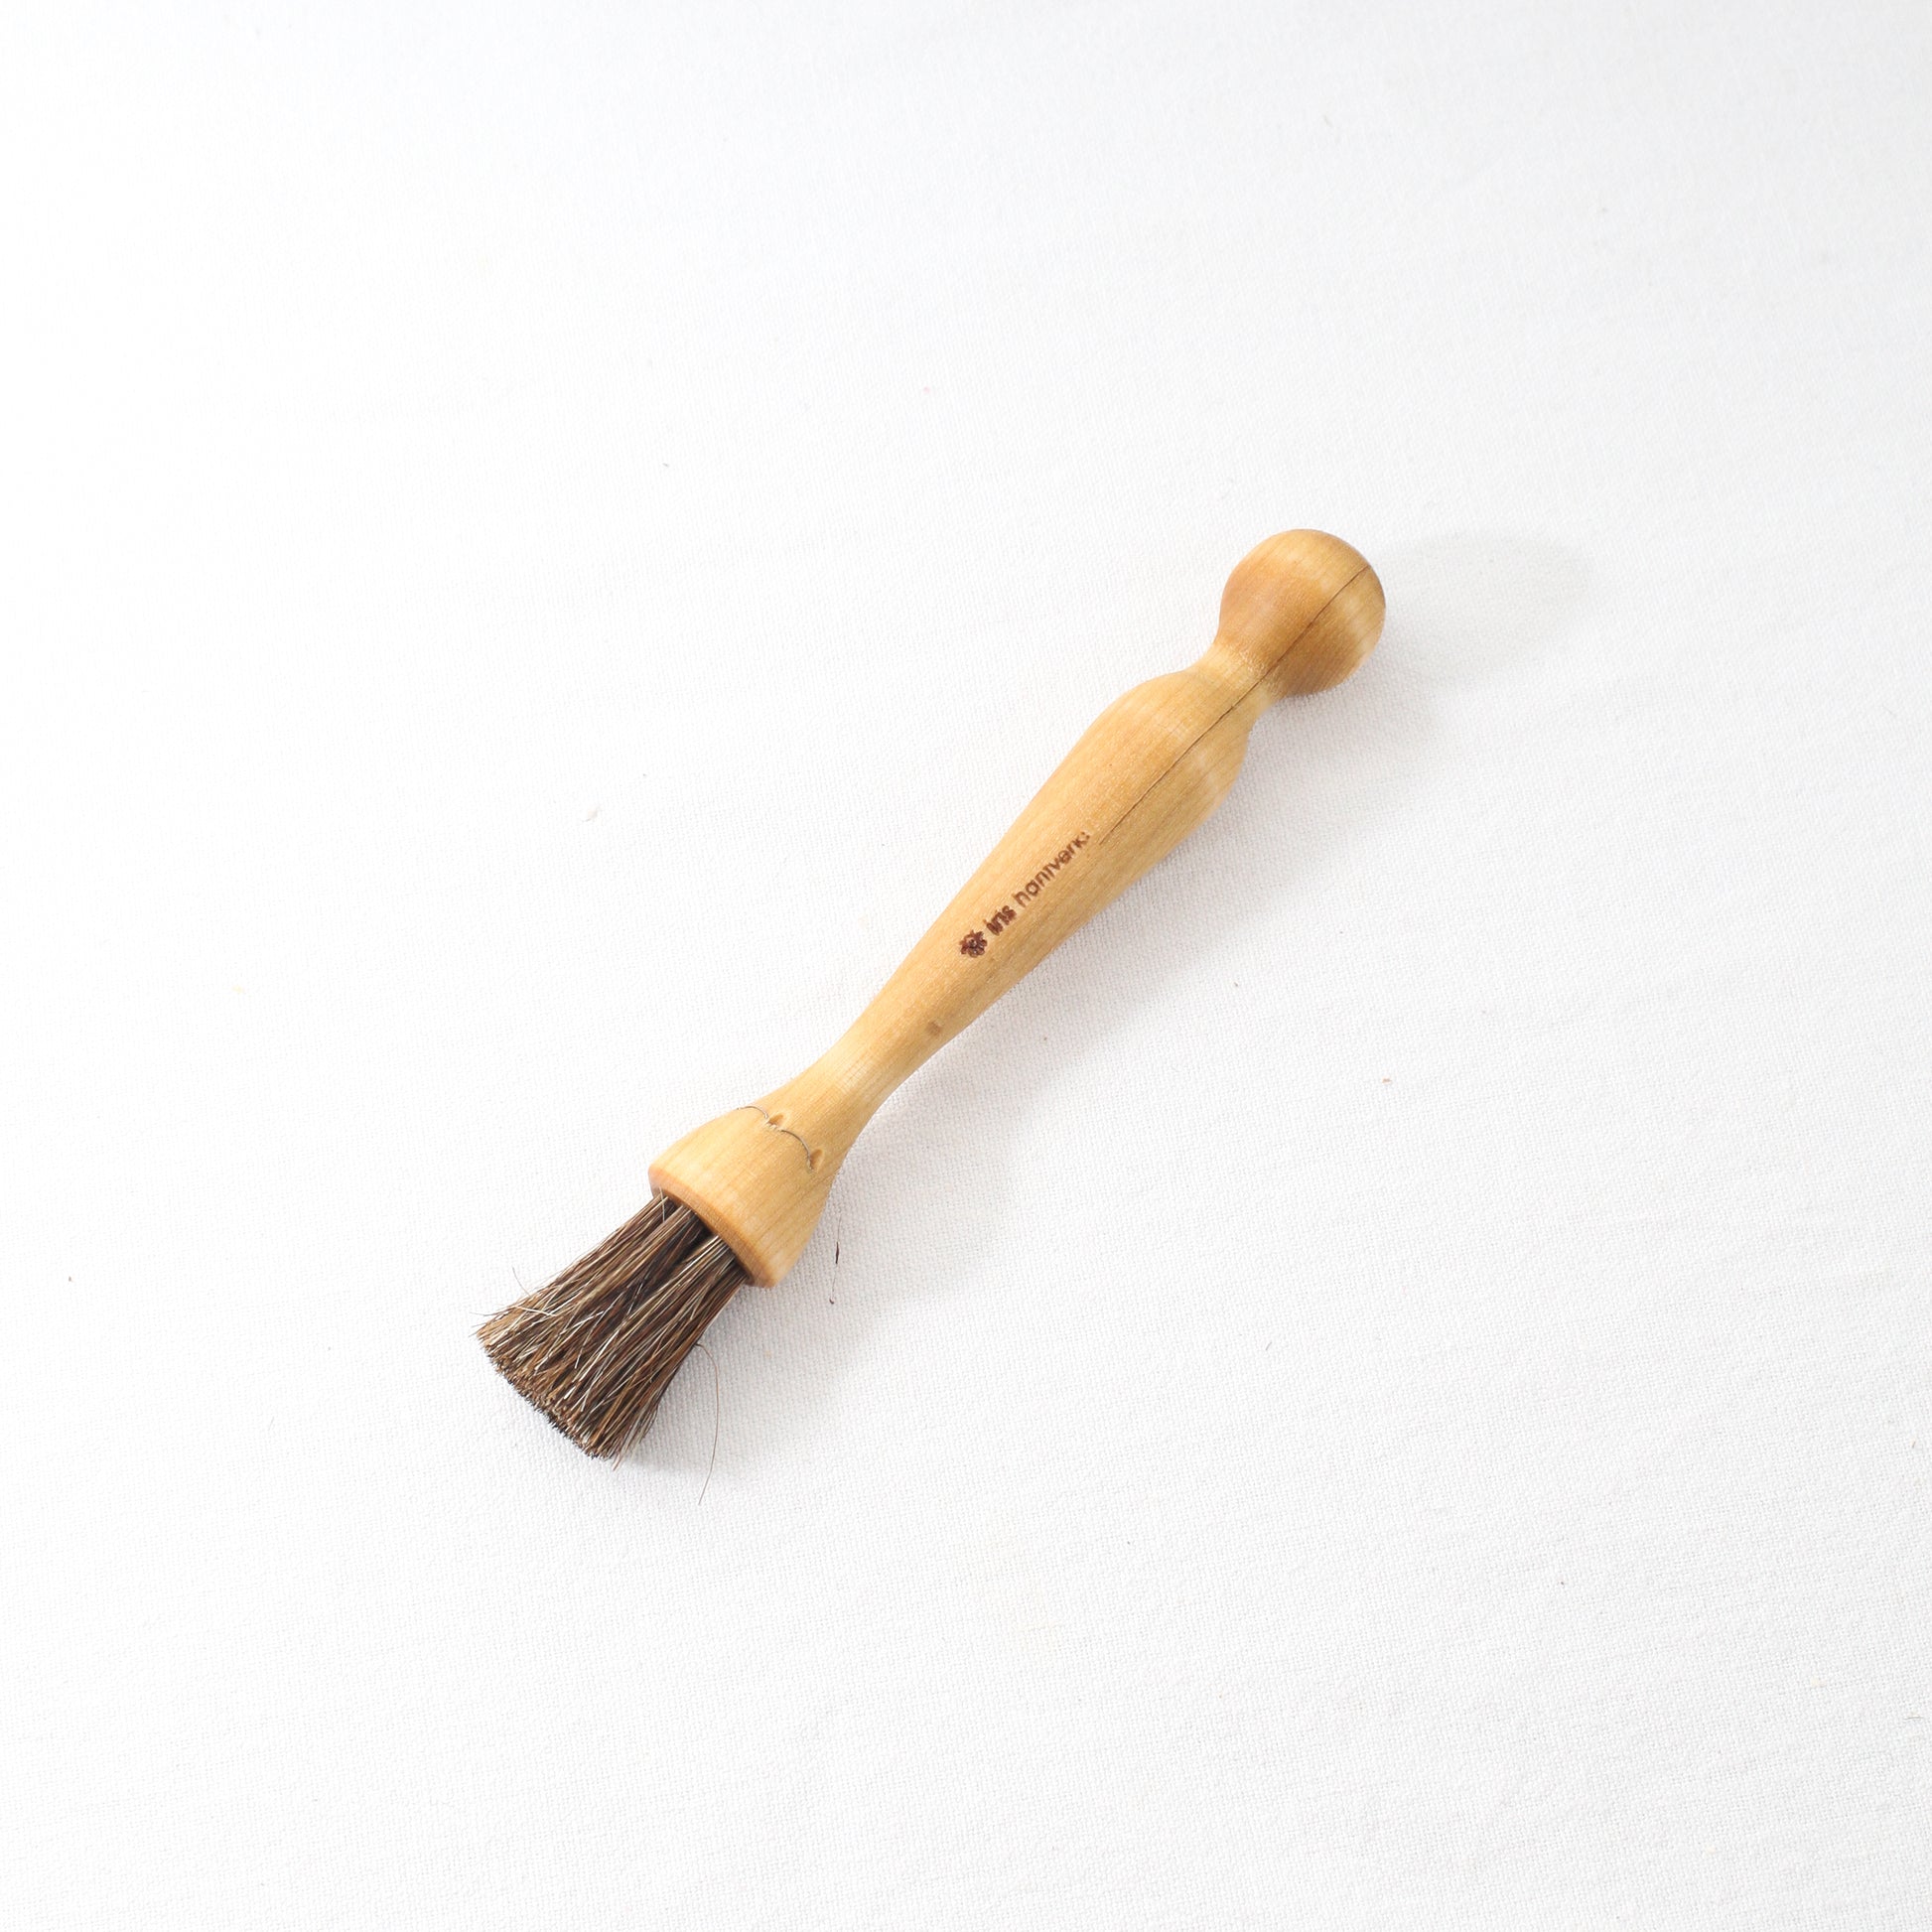 a wooden mushroom or pastry brush